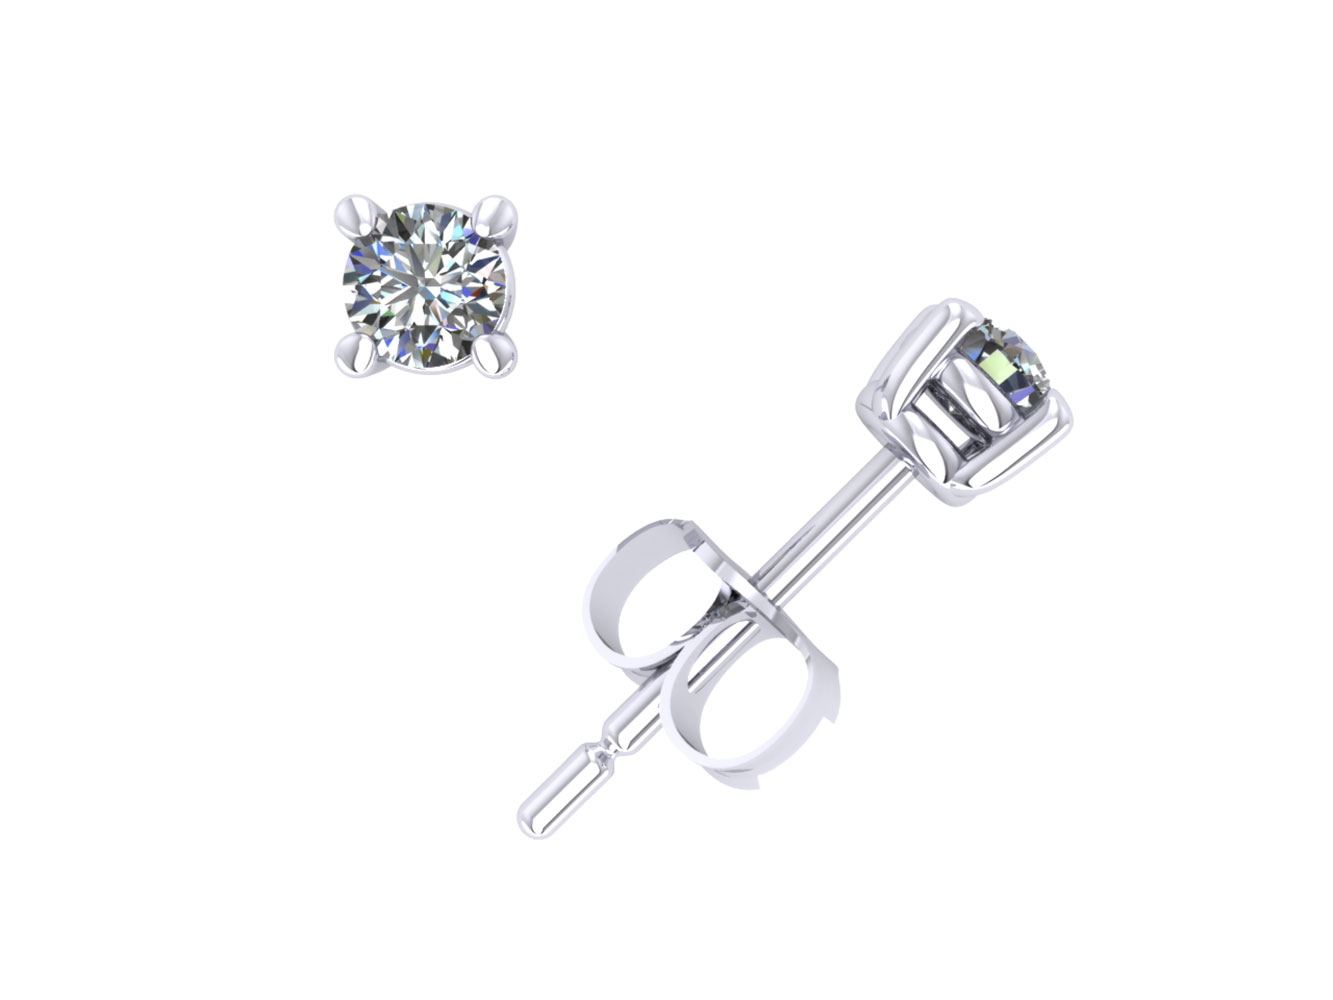 Jewel We Sell Real 0.15Ct Round Cut Diamond Basket Stud Earrings 14k White or Yellow Gold Prong H SI2